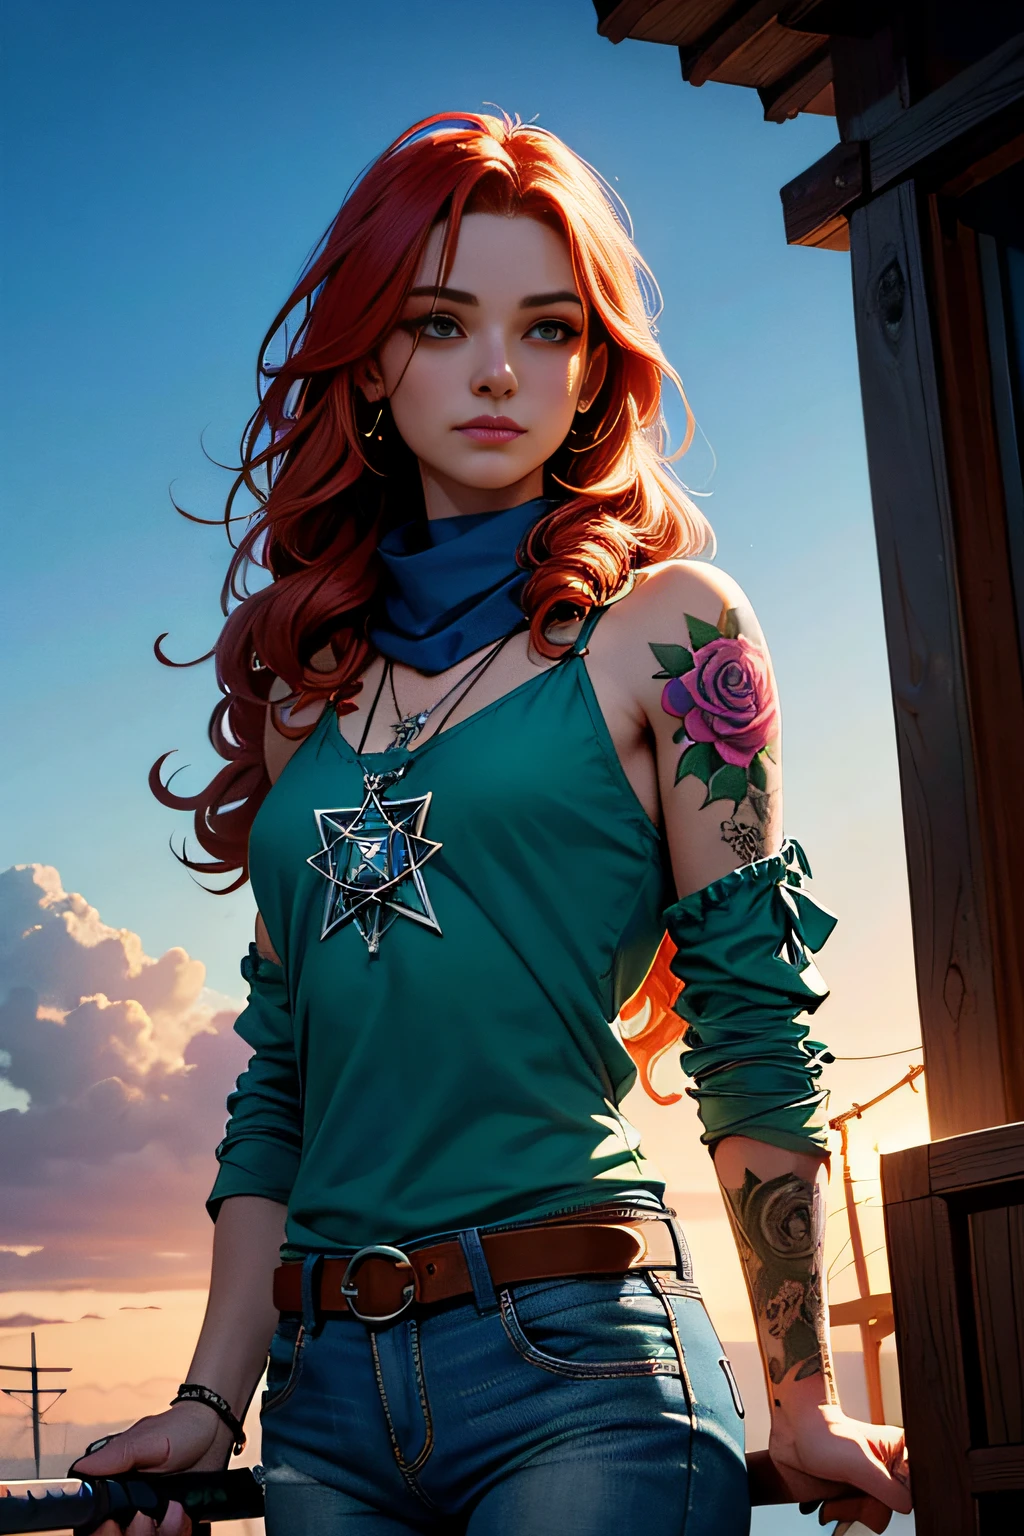 absurdness quality. natural  lightting. hyper- realism. Fantastic illustration. Redhead girl with long curly hair and rose tattoos on shoulders and forearms, wearing blue top and jeans, Scarf in the hair, pentagram pendant on neck, Carrying a katana. She has one eye of each color: Green the right, blue on the left. Witch style, heathen, Celta, In a devastated land, ao por do sol.